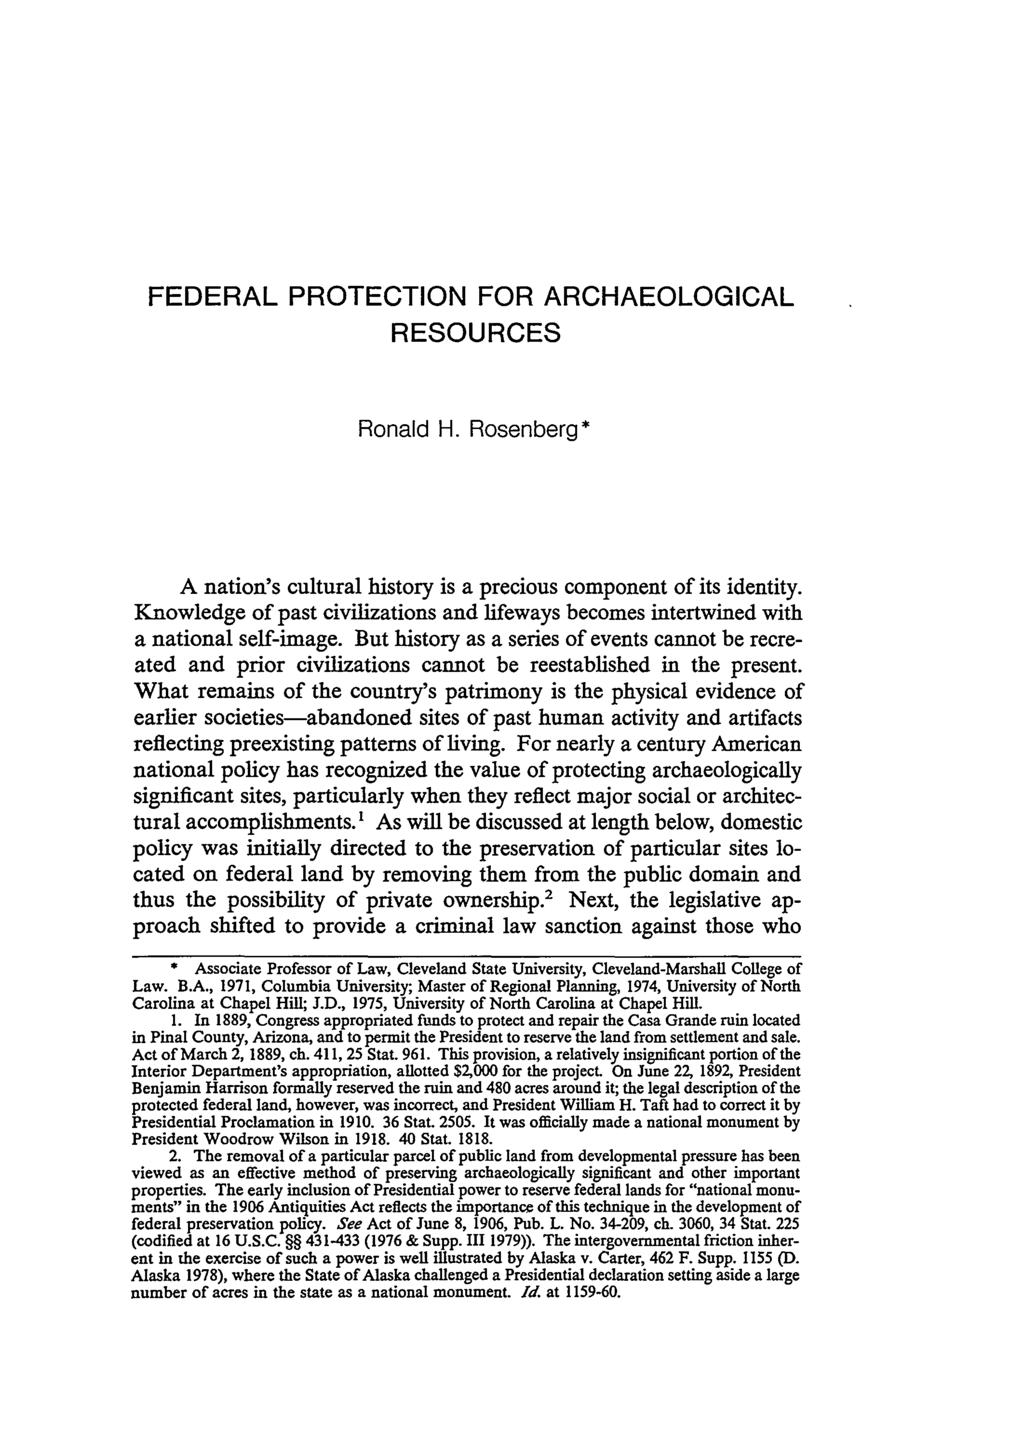 FEDERAL PROTECTION FOR ARCHAEOLOGICAL RESOURCES Ronald H. Rosenberg* A nation's cultural history is a precious component of its identity.